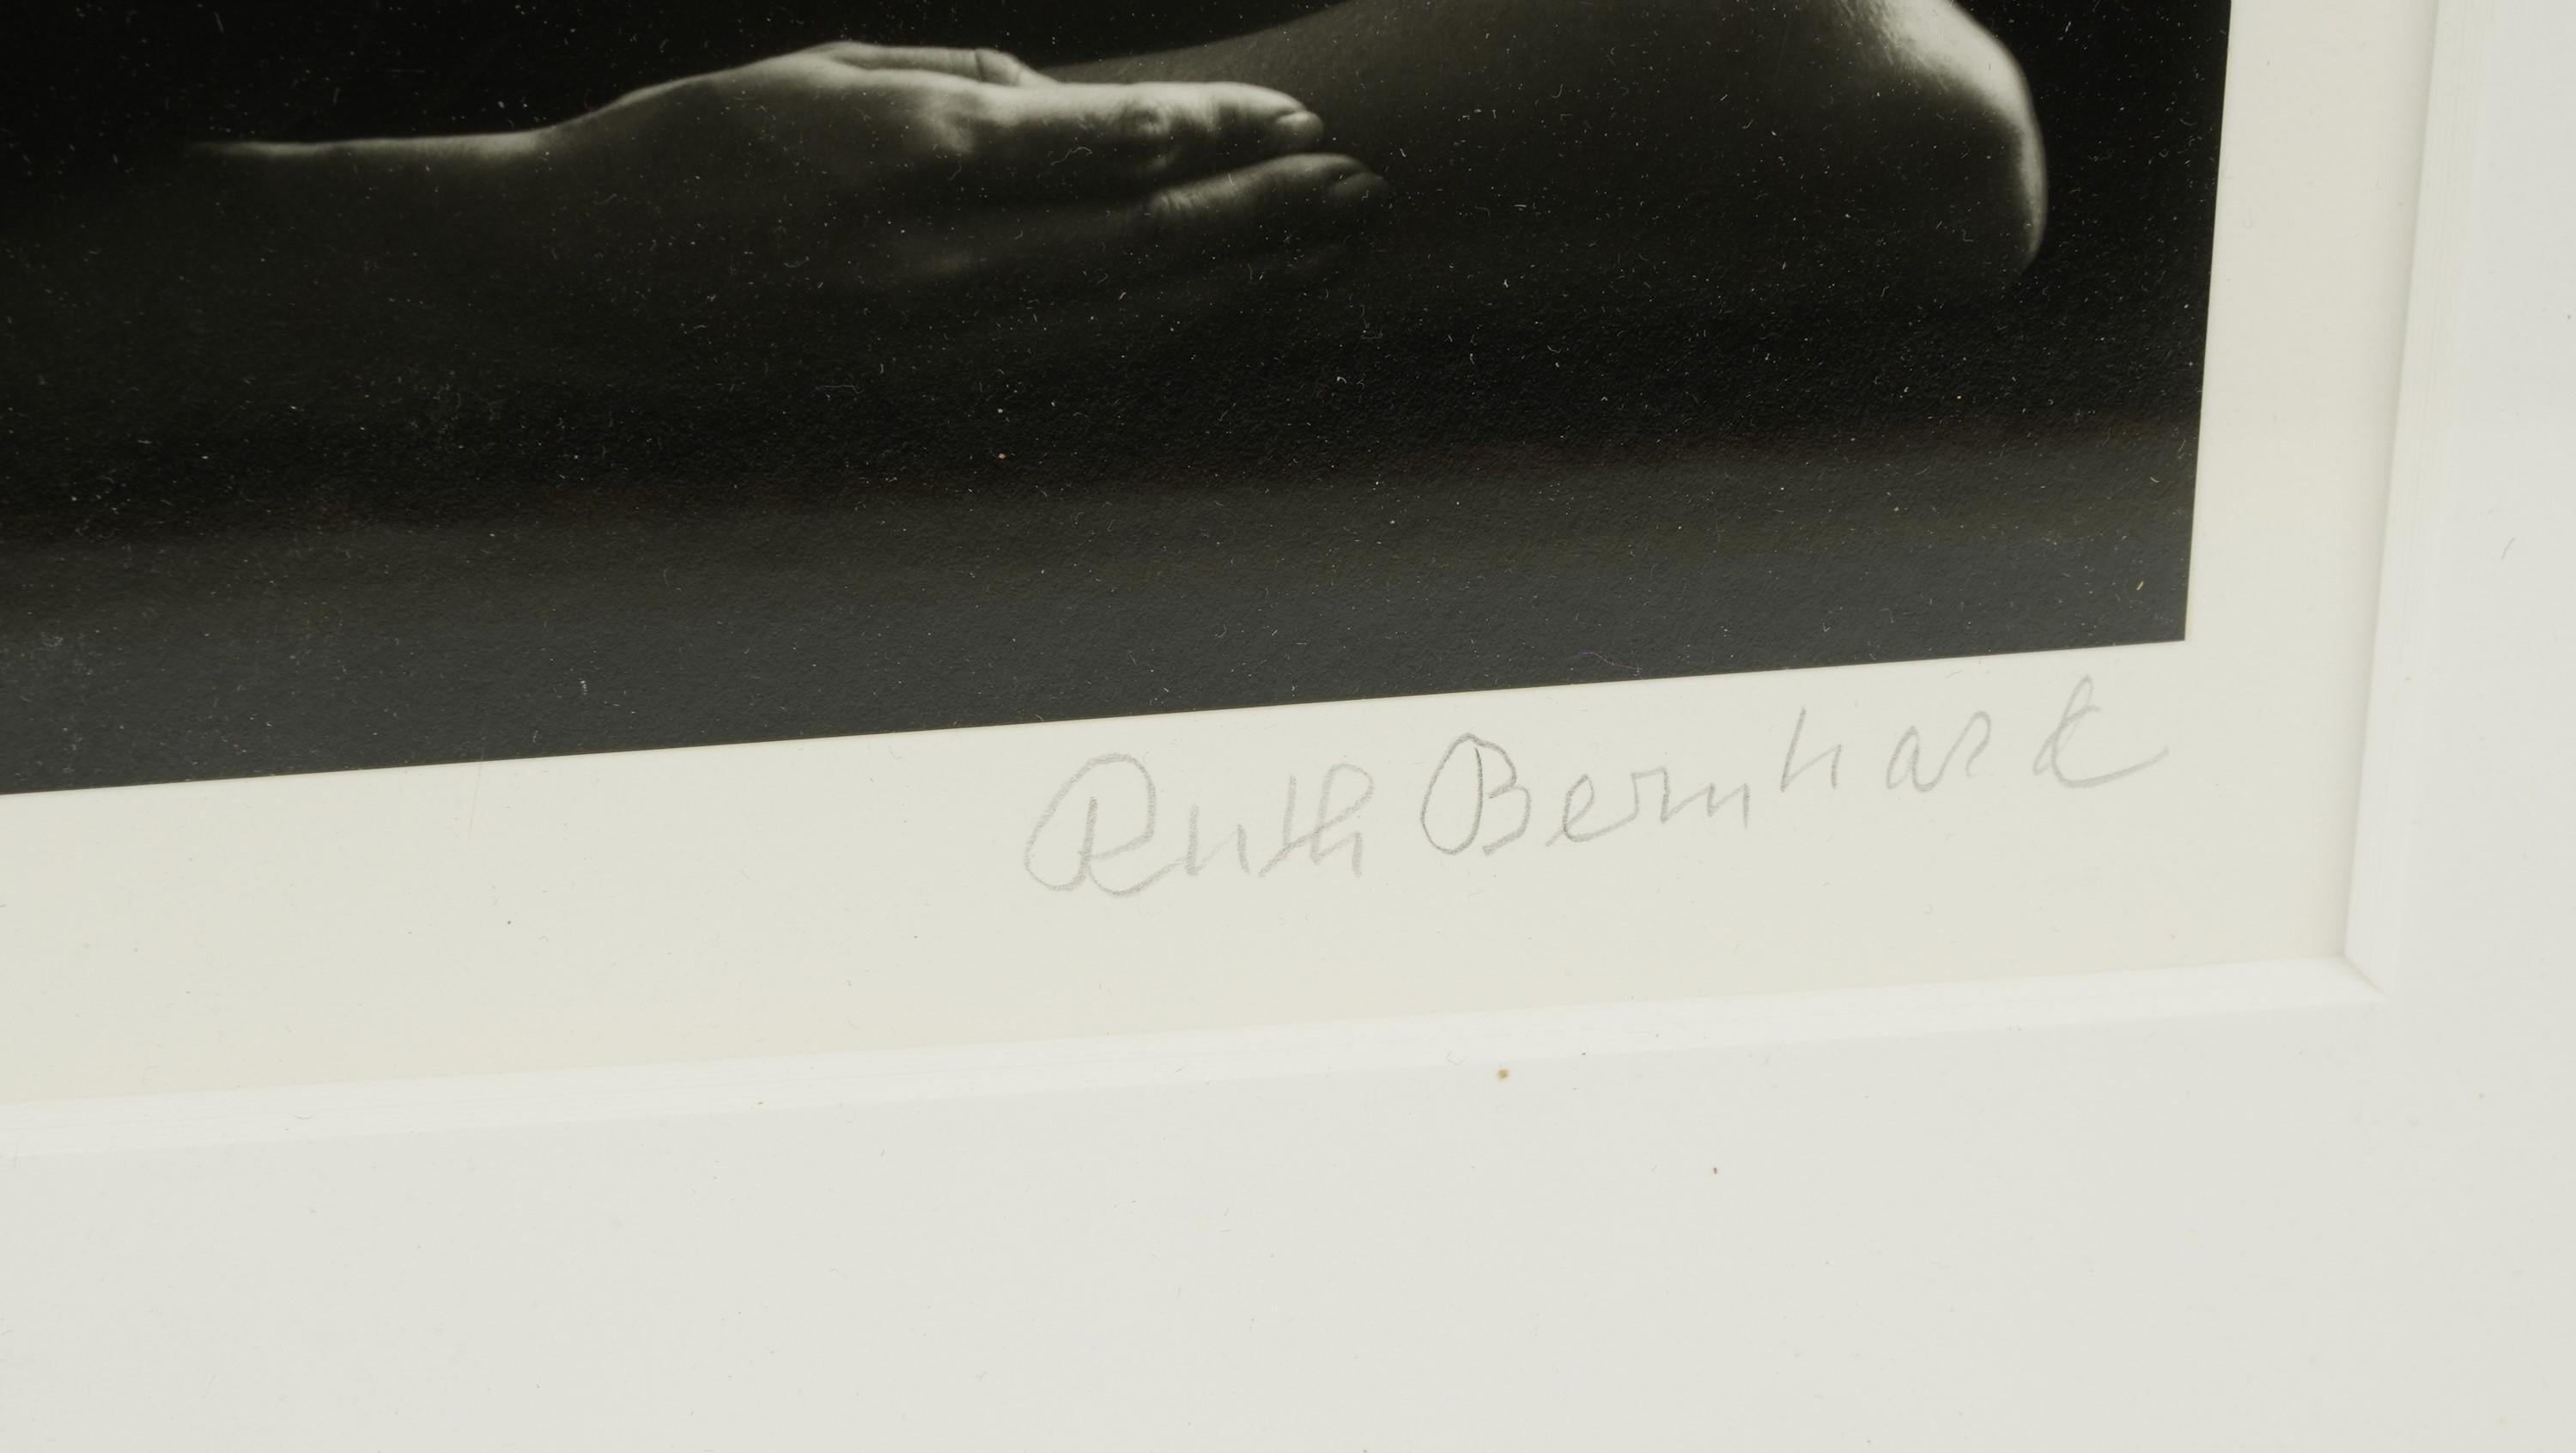 Ruth Bernhard Signed Gelatin Silver Photograph Print Perspective II, 1967 For Sale 2